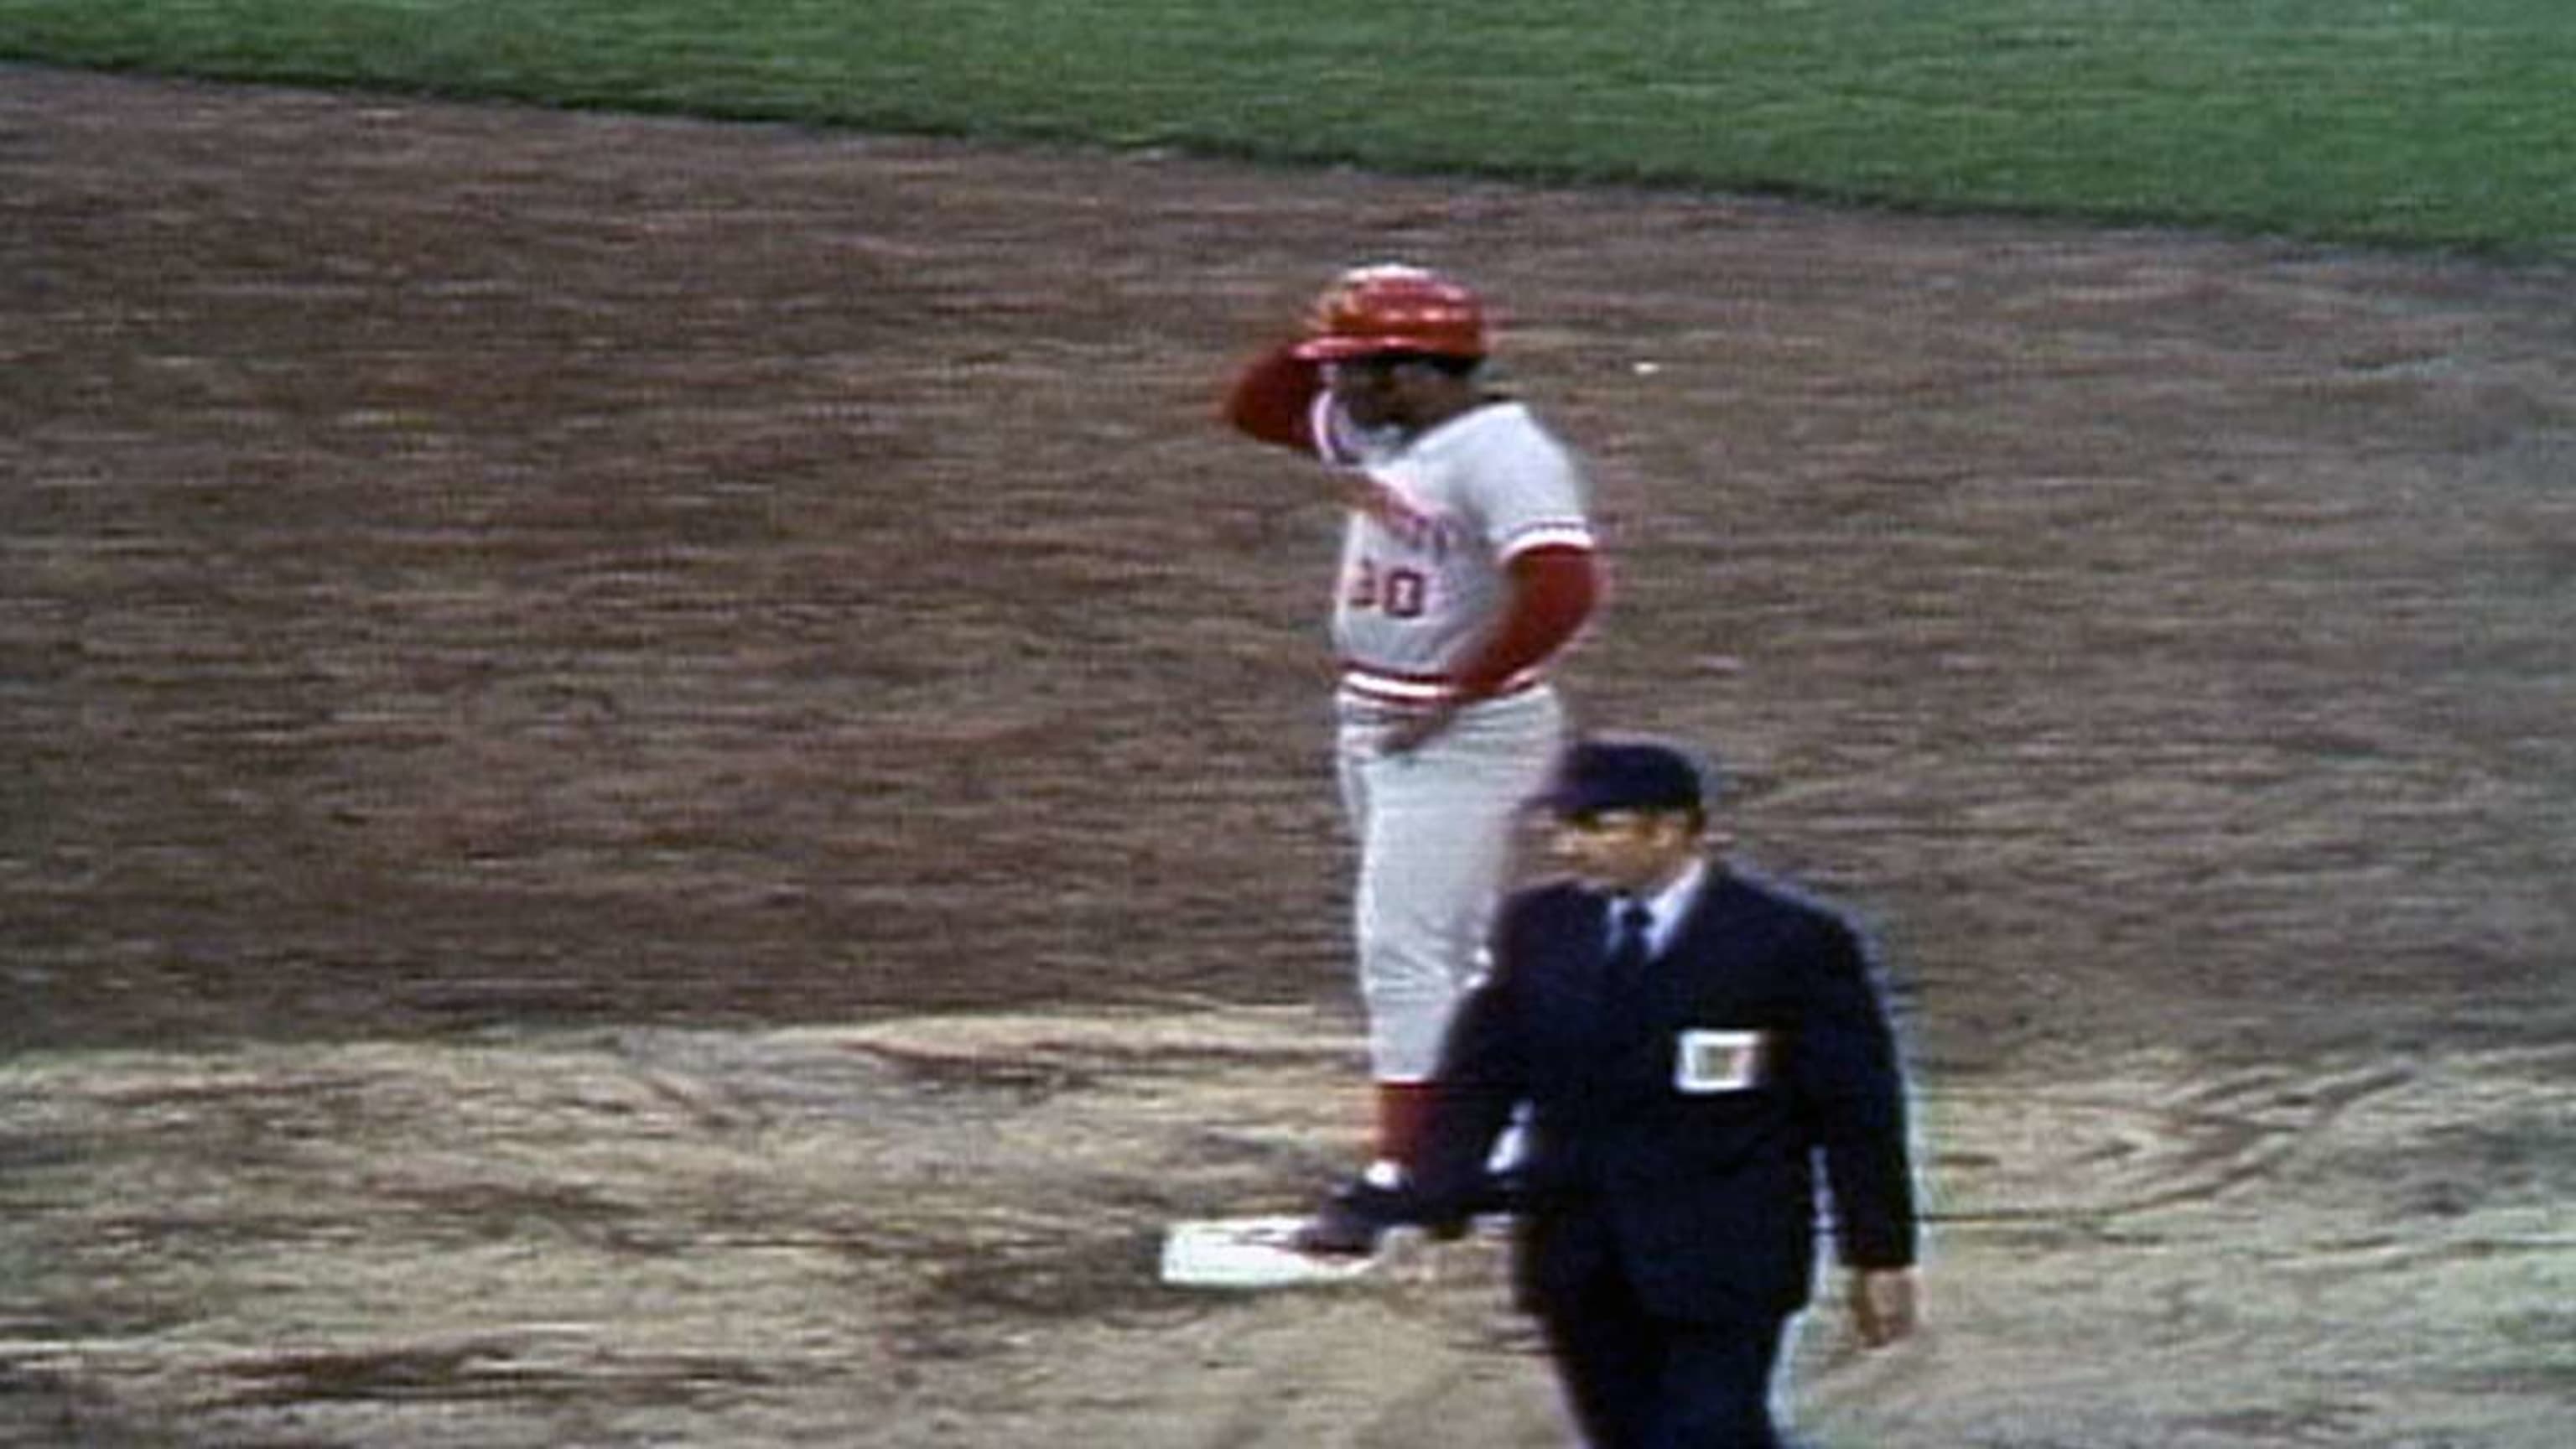 Fisk 1975 World Series, Carlton Fisk willed the Red Sox to a win in Game 6  of the 1975 World Series., By Boston Red Sox Highlights